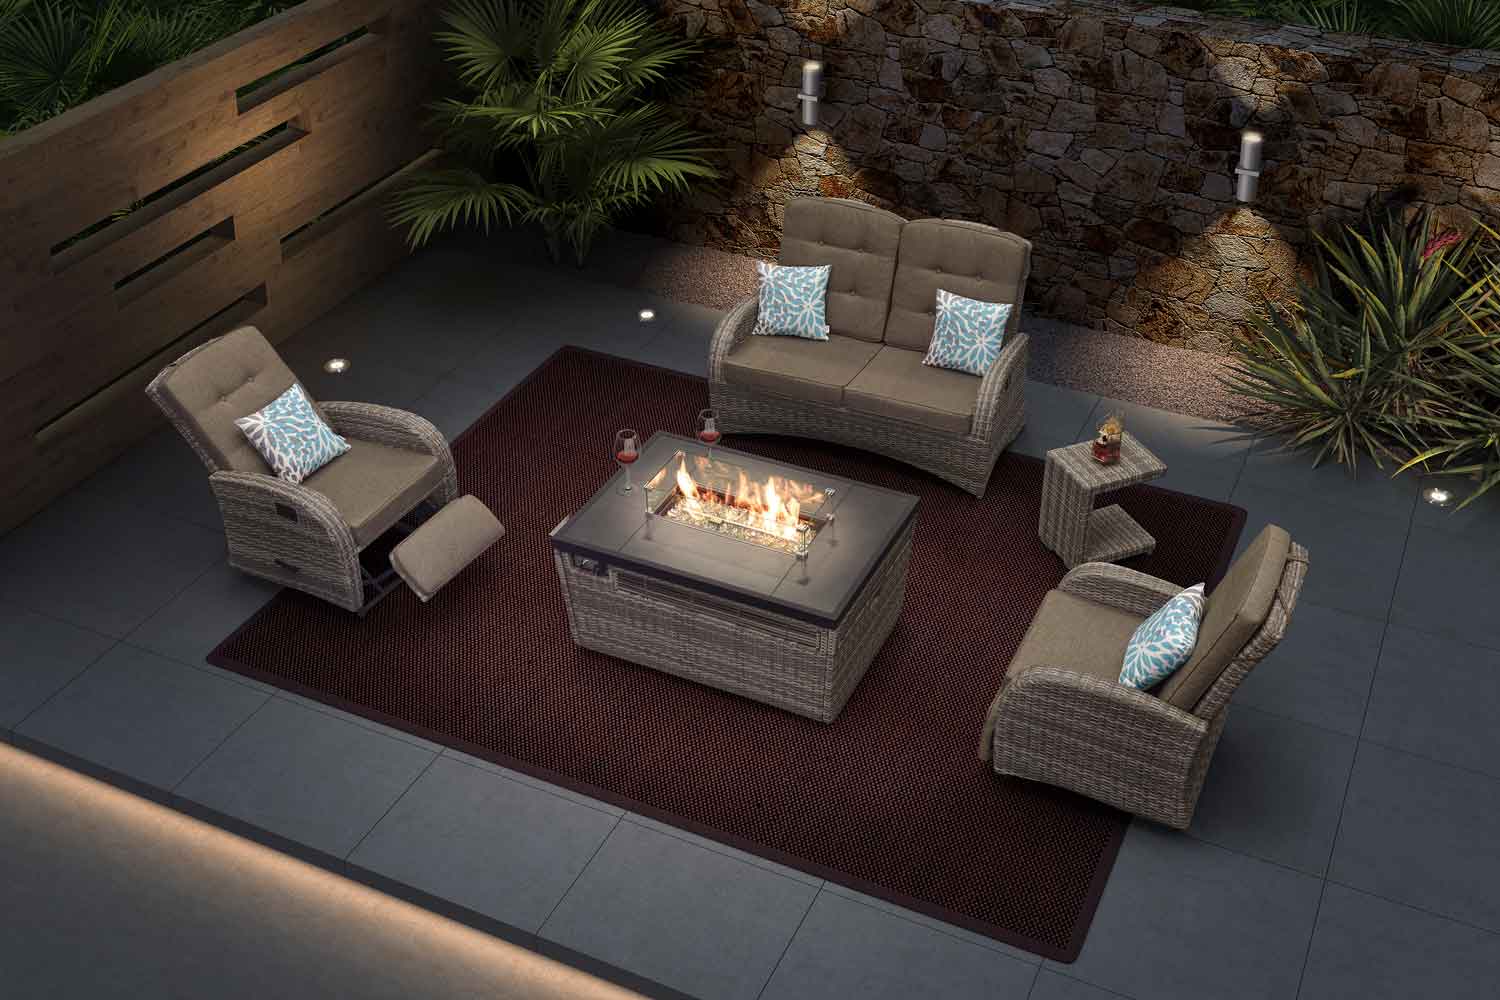 Villa Furniture Wicker Patio Set With Gas Fire Pit For Home